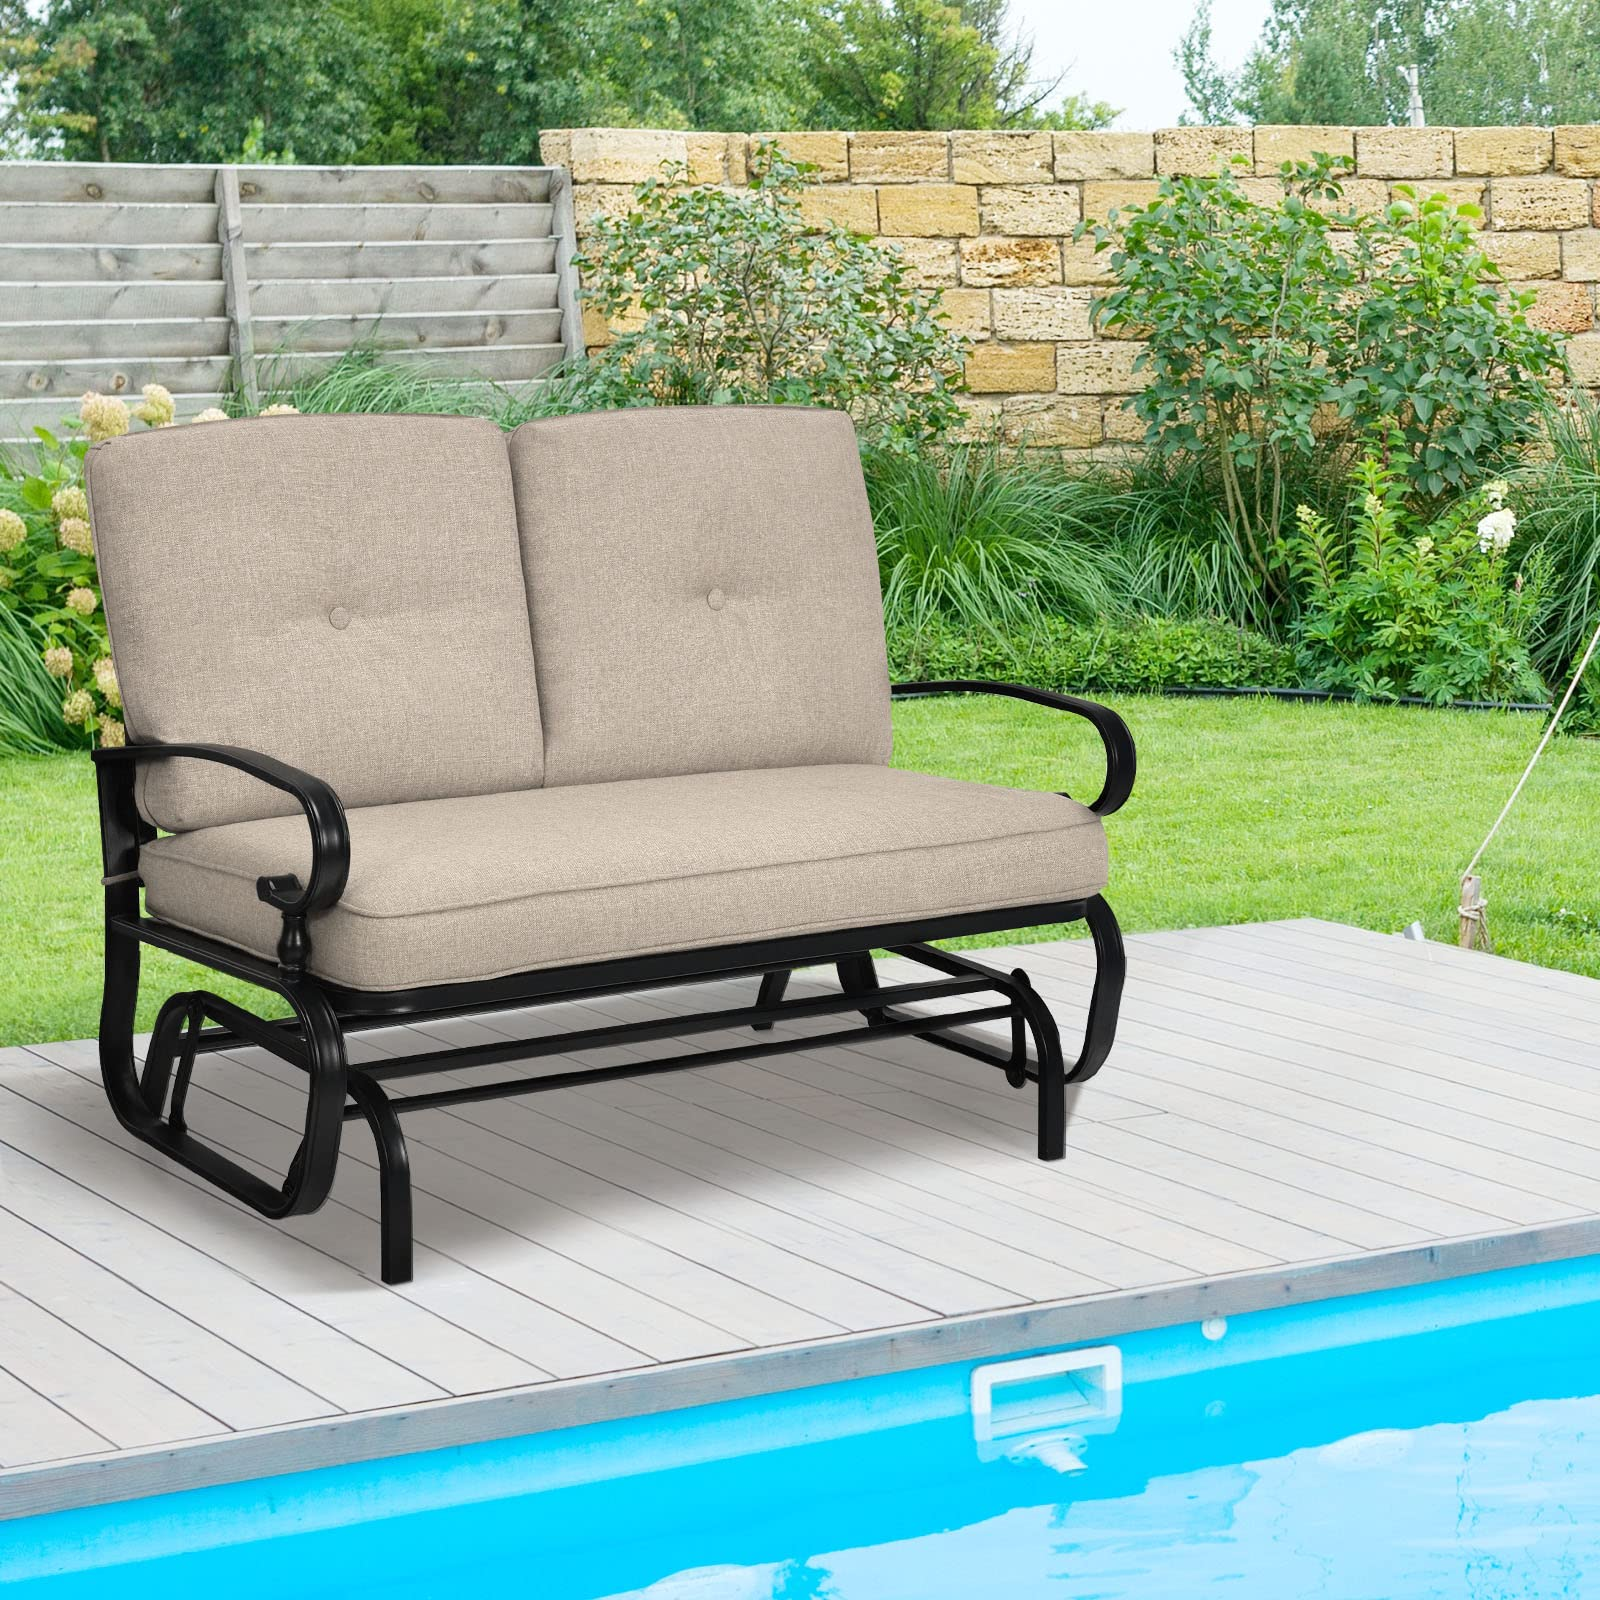 Giantex Outdoor Glider Bench Patio Loveseat with Cushions